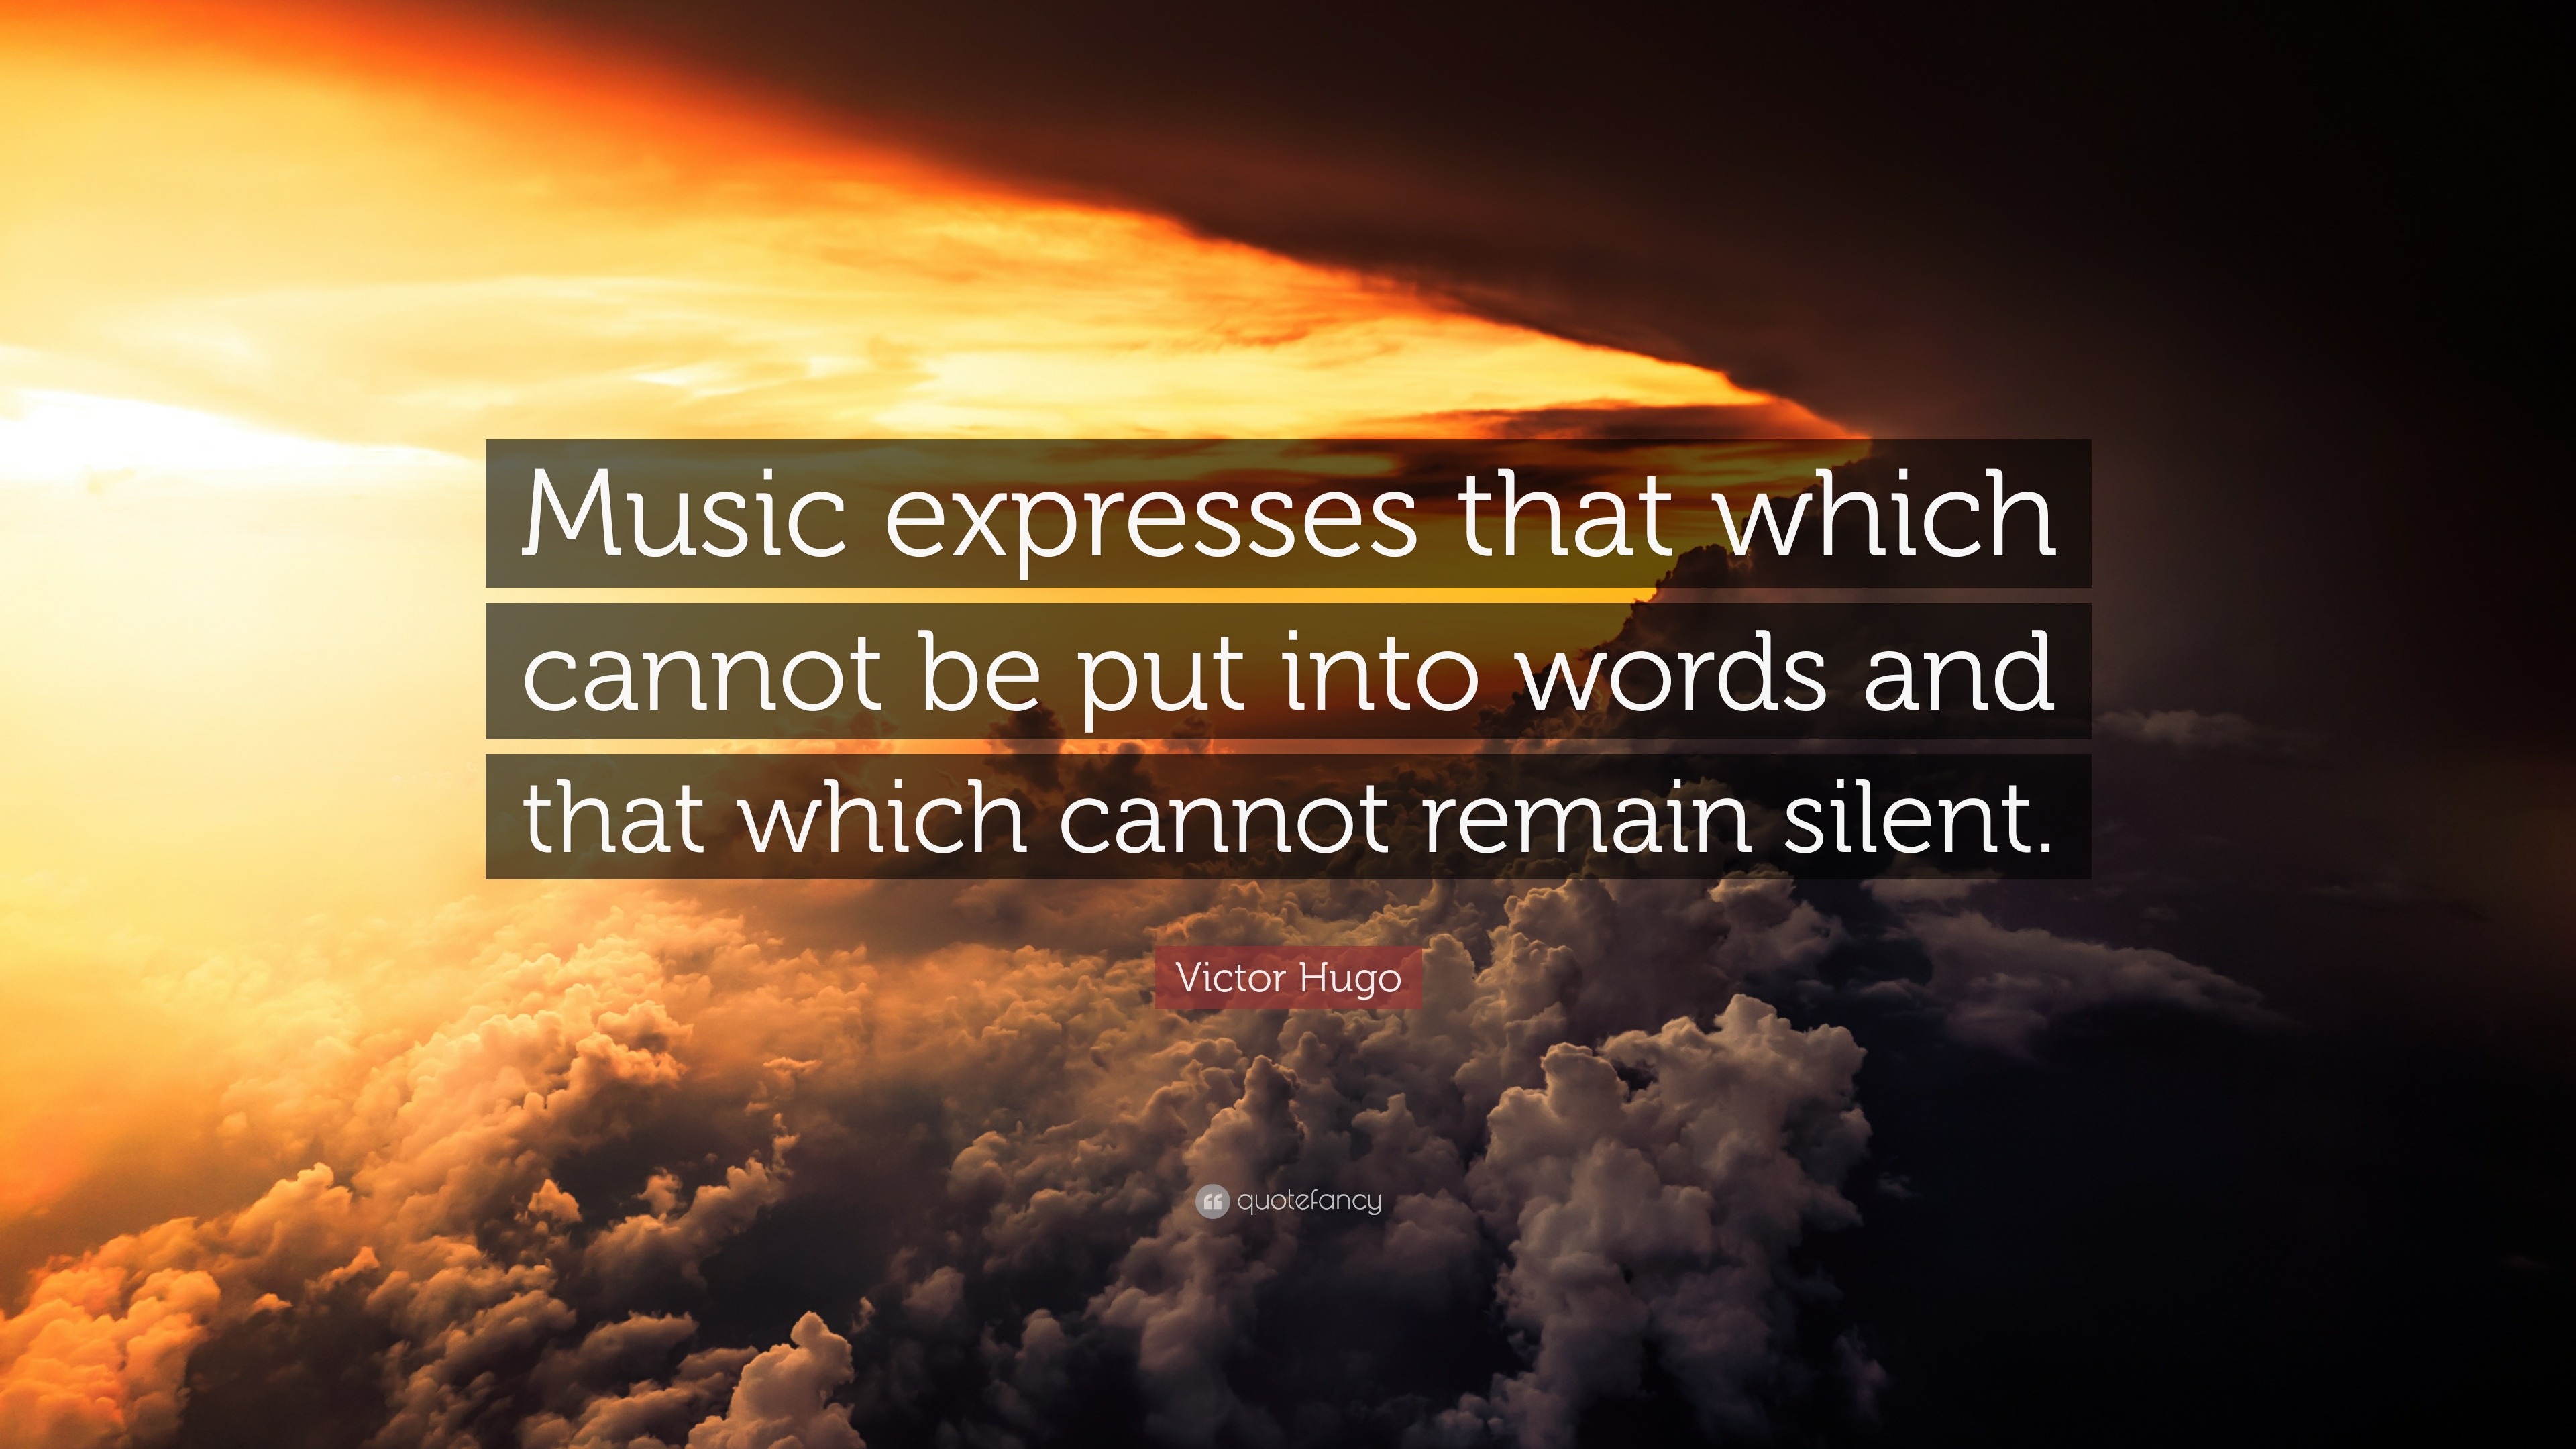 Victor Hugo Quote: “Music expresses that which cannot be put into words